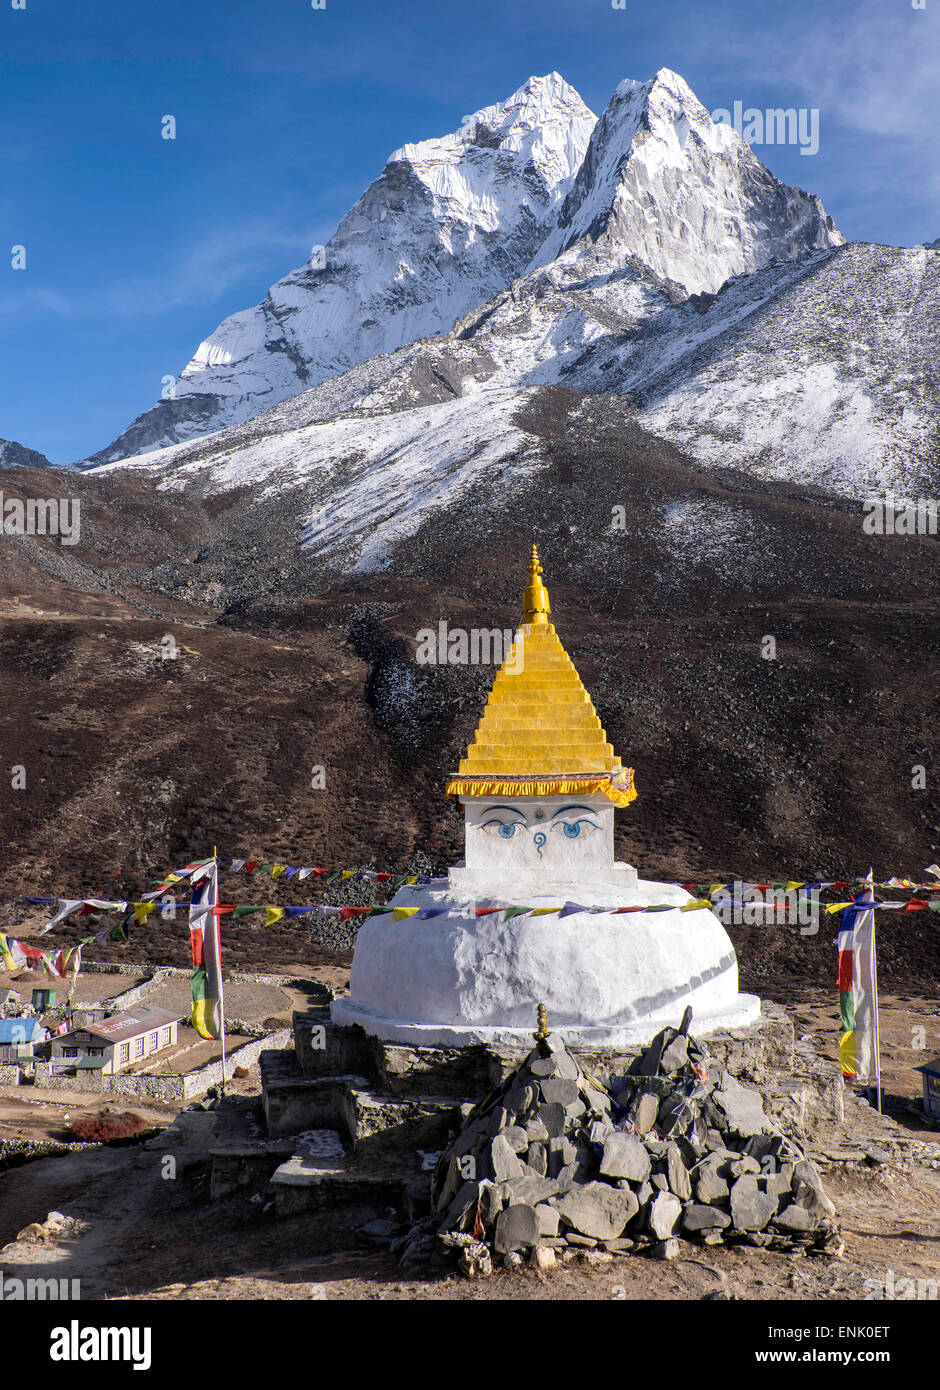 Buddhist Stupa outside the town of Dingboche in the Himalayas, Nepal, Asia Stock Photo